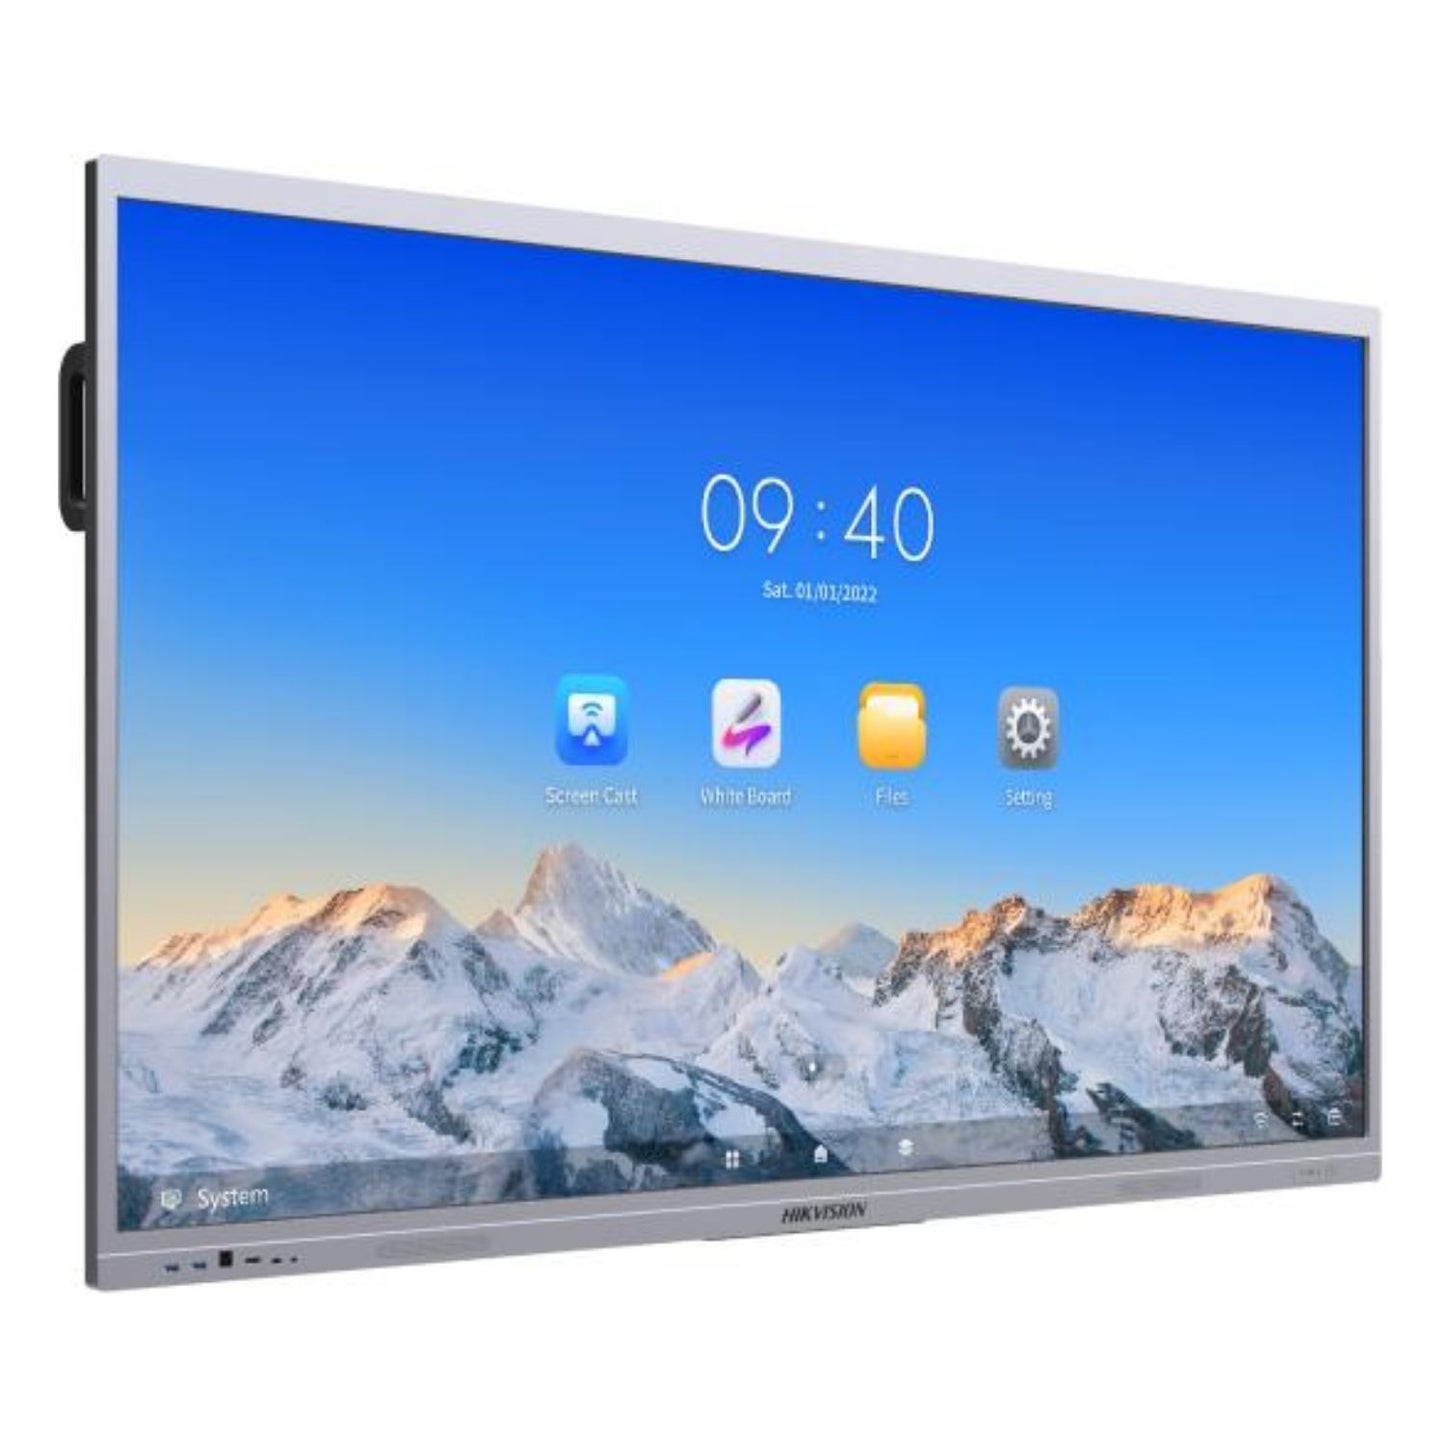 DS-D5C75RB/A - 75-inch 4K Interactive Display